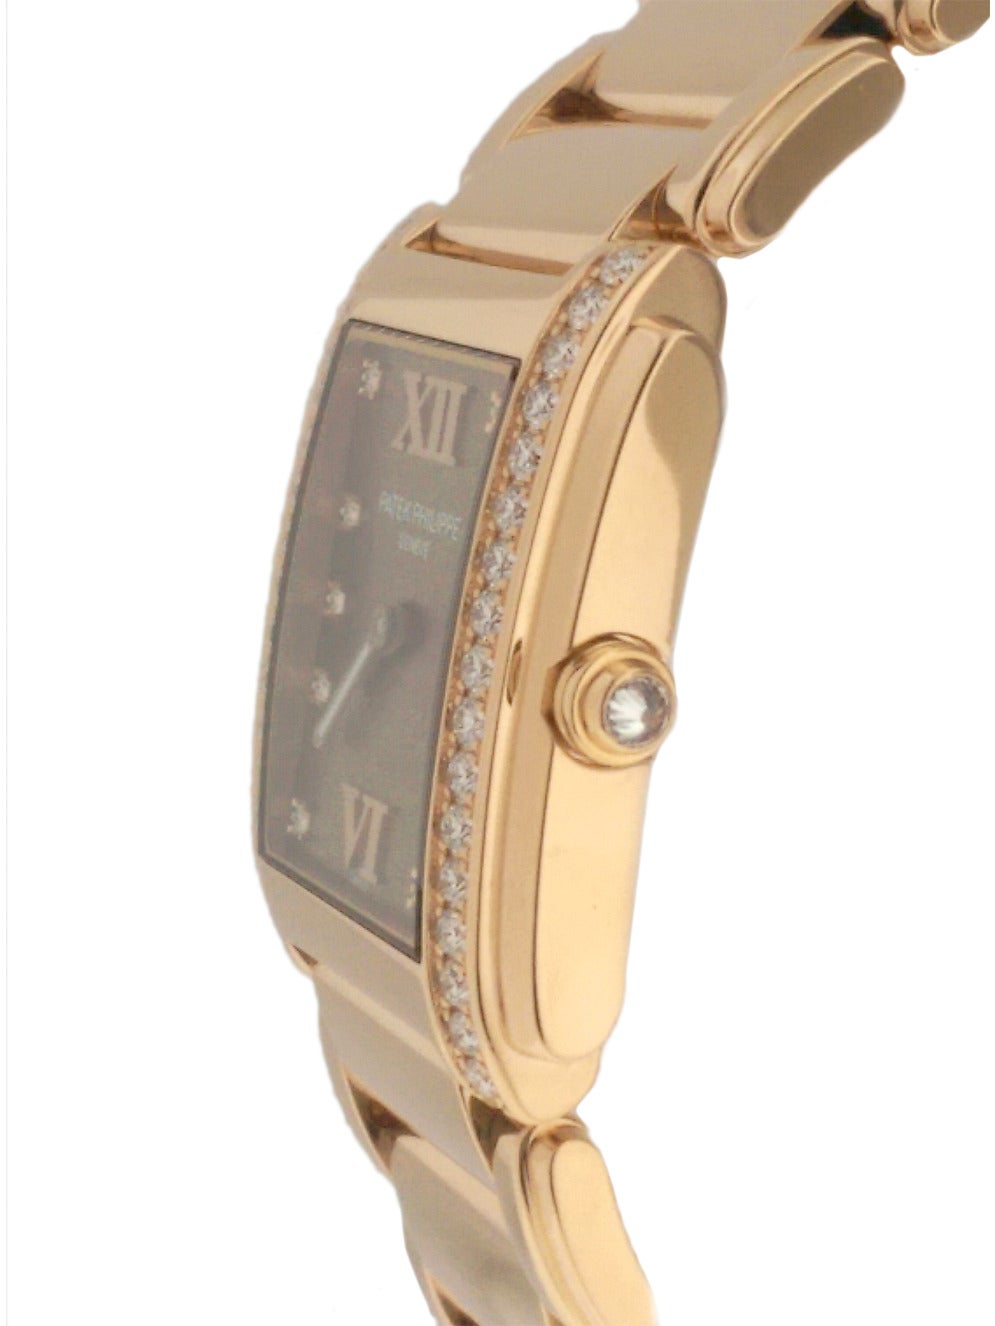 Ladies Patek Philippe Twenty 4 in 18K rose gold, Ref#4910/11R. On 18K rose gold bracelet with concealed clasp, diamonds set on sides of case, diamond crown, case dimensions 30mm x 25mm. Quartz movement. Chocolate dial with diamond hour markers and